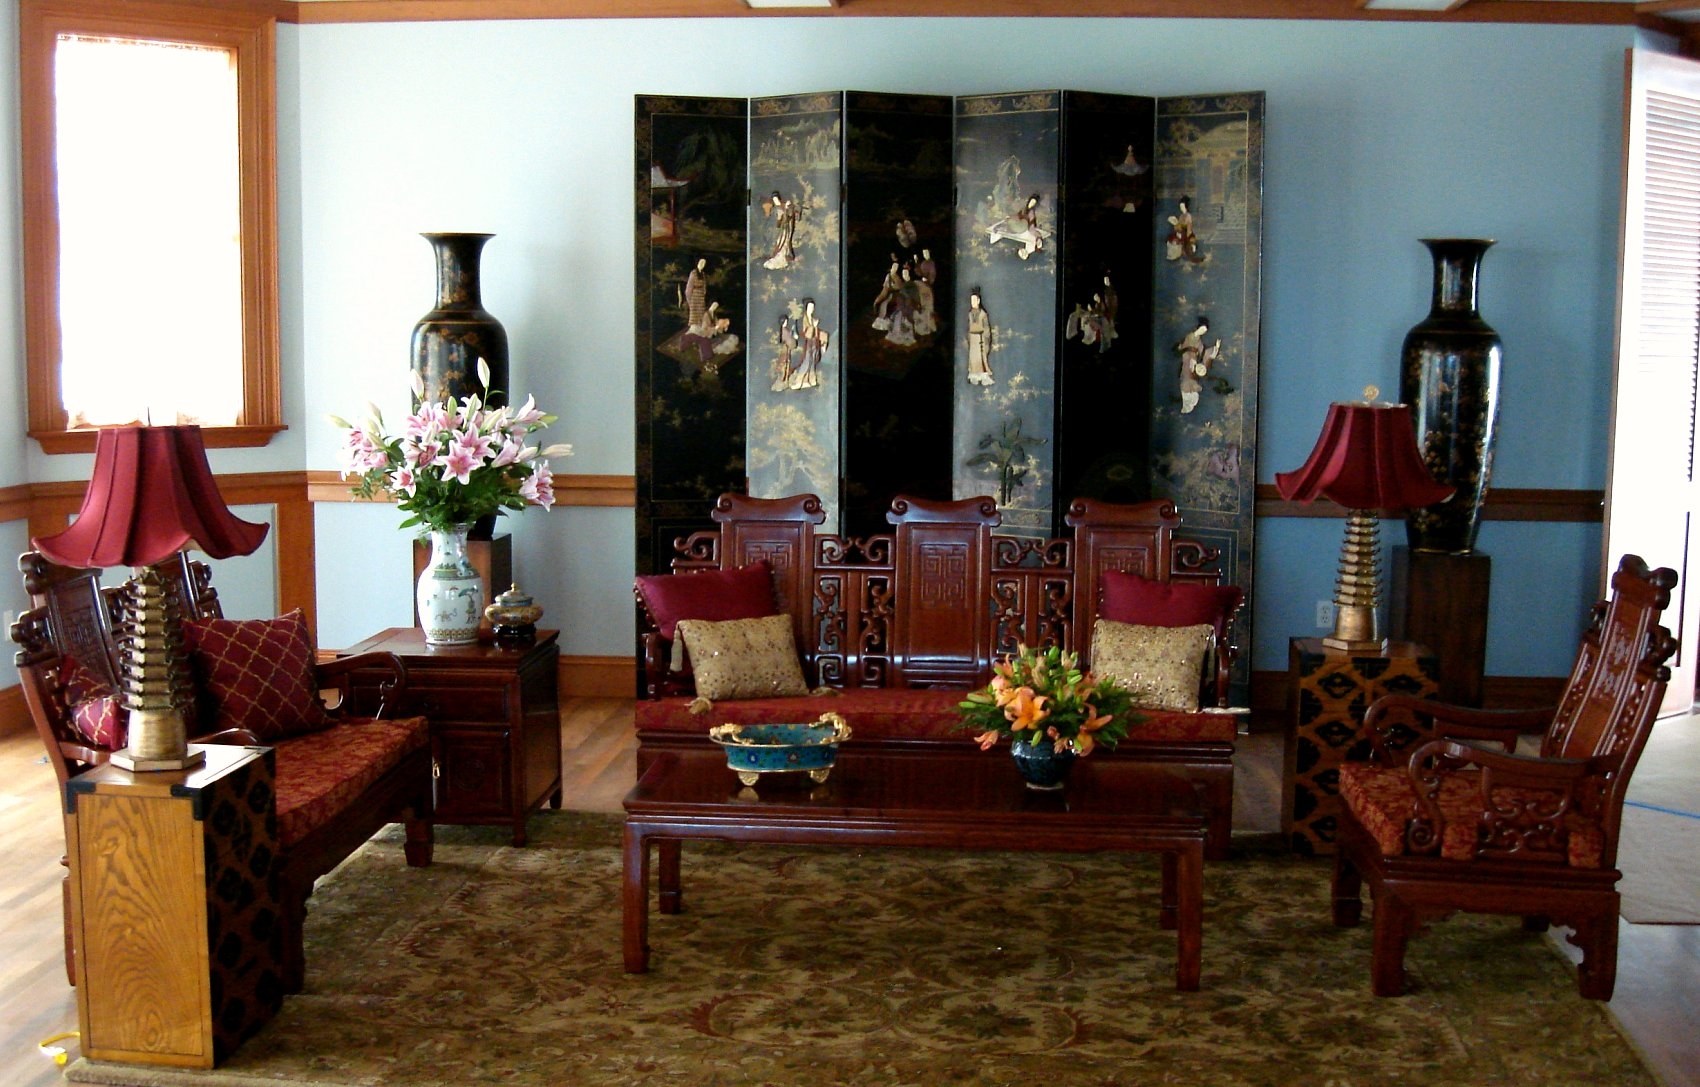 Lovely-Charming-Chinese-Traditional-Living-Room-Interior-Design-Traditional-Asian-Chinese-Living-Room-Antique-Wood-Furniture-Set-Decorations-Interior-Design-Styles-Inspiring-Designs